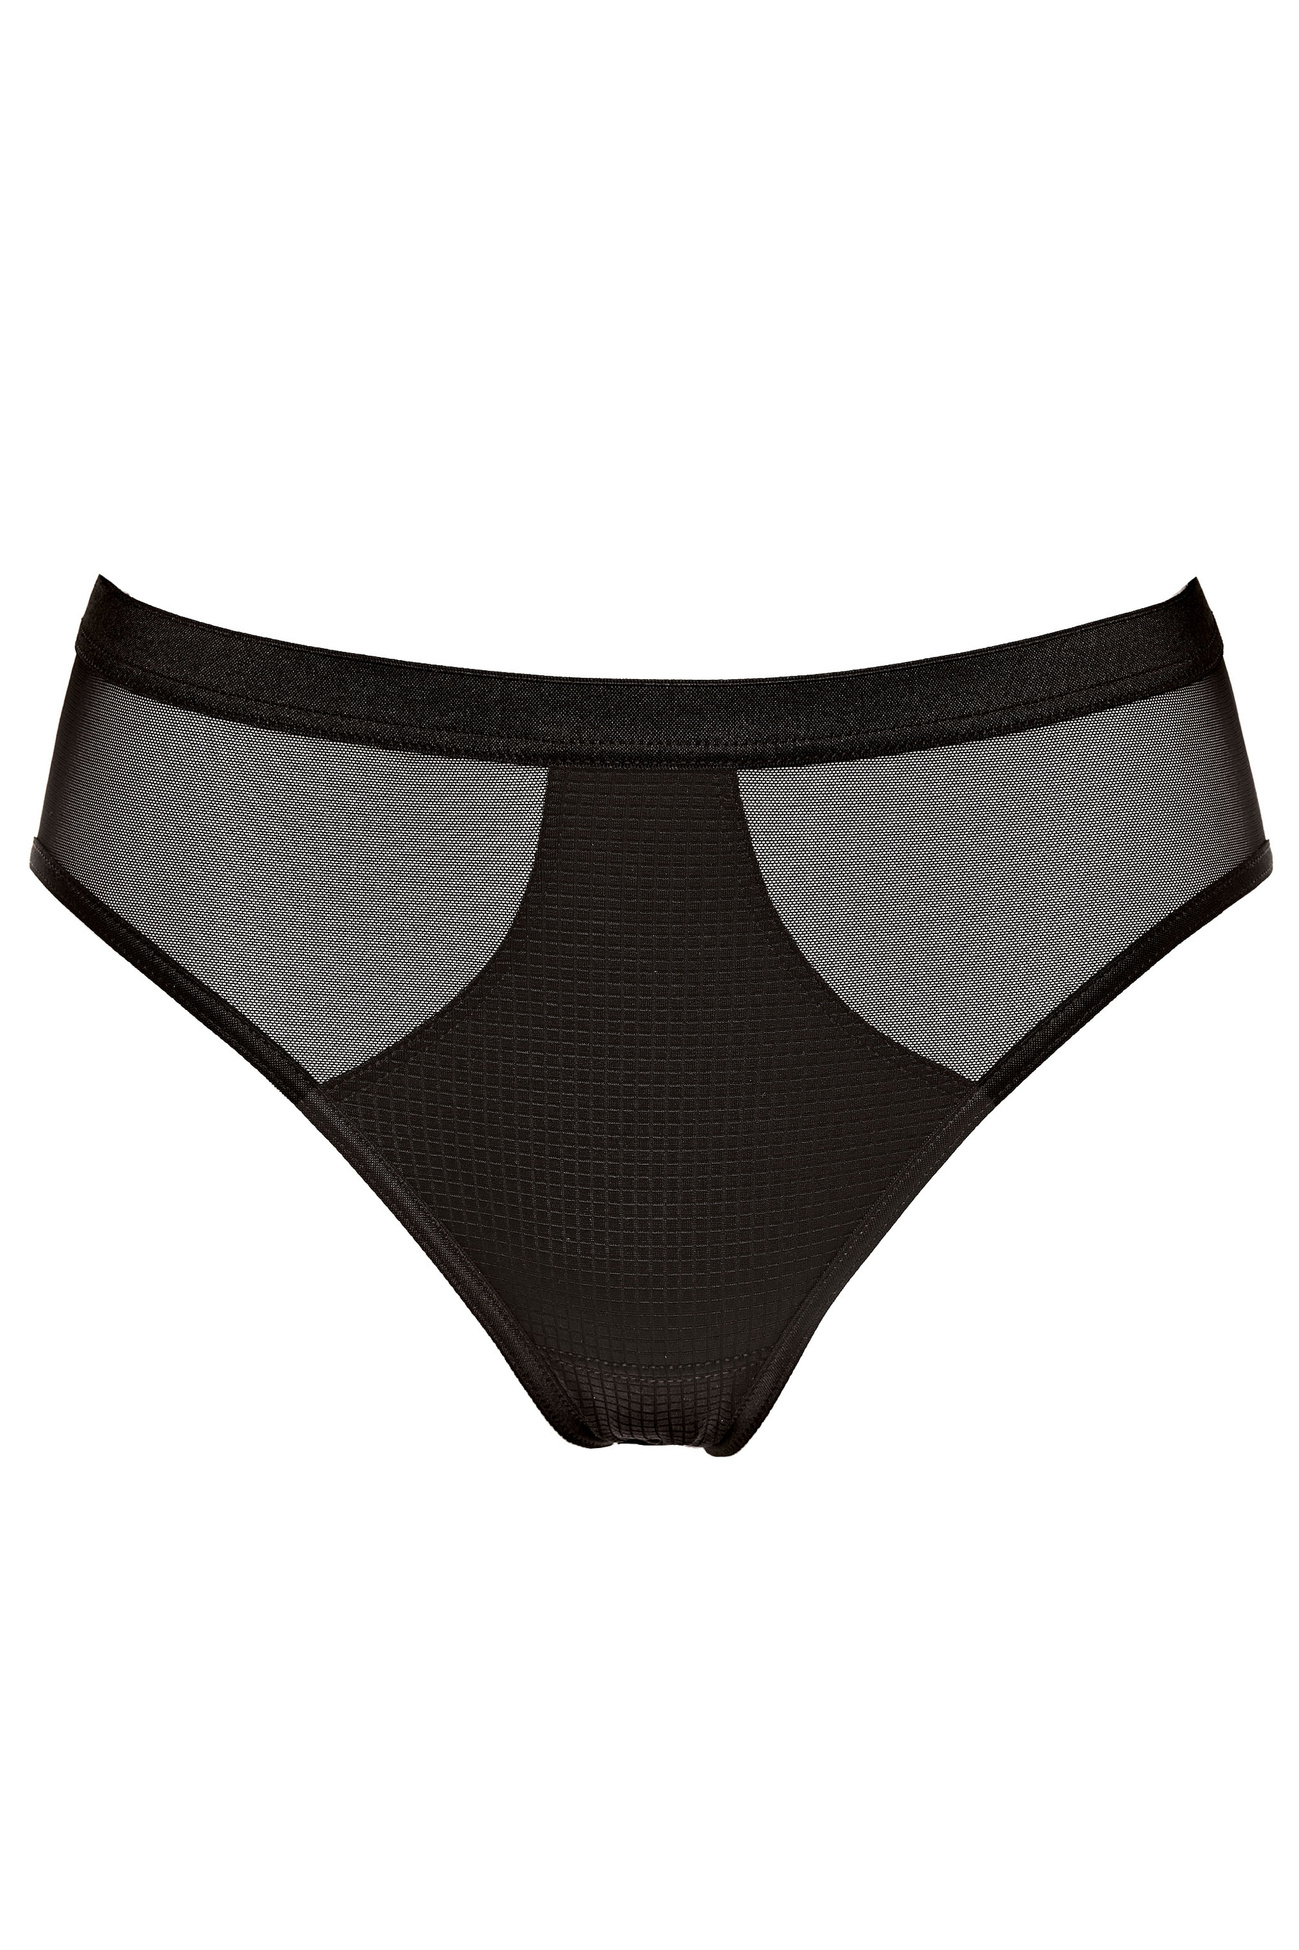 Andrea panty made of soft fabric black